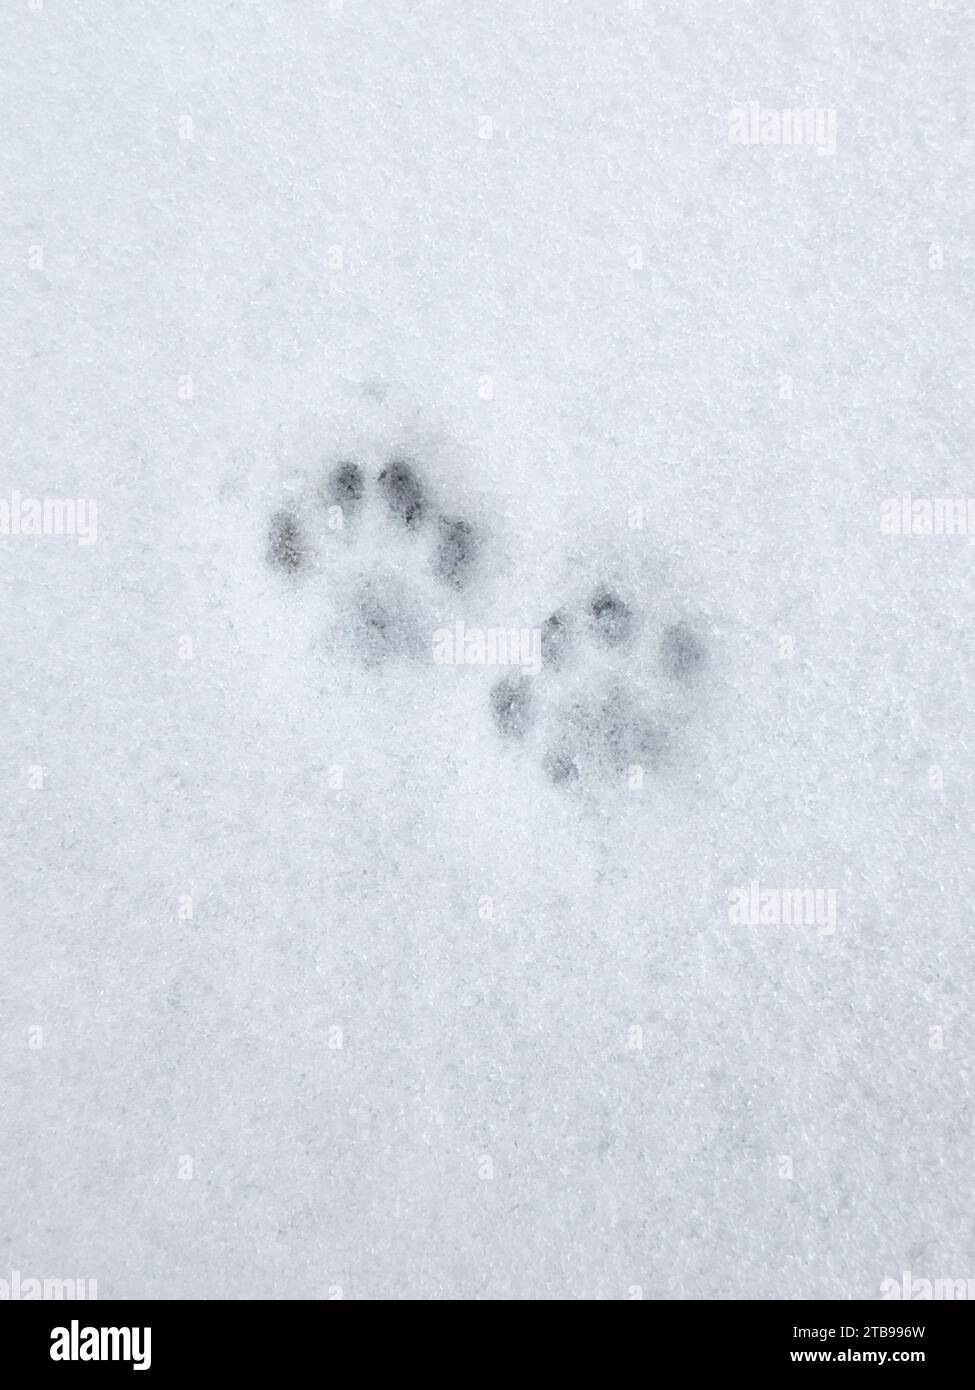 Cat footprint on a snow, animal trace, close up, top view Stock Photo